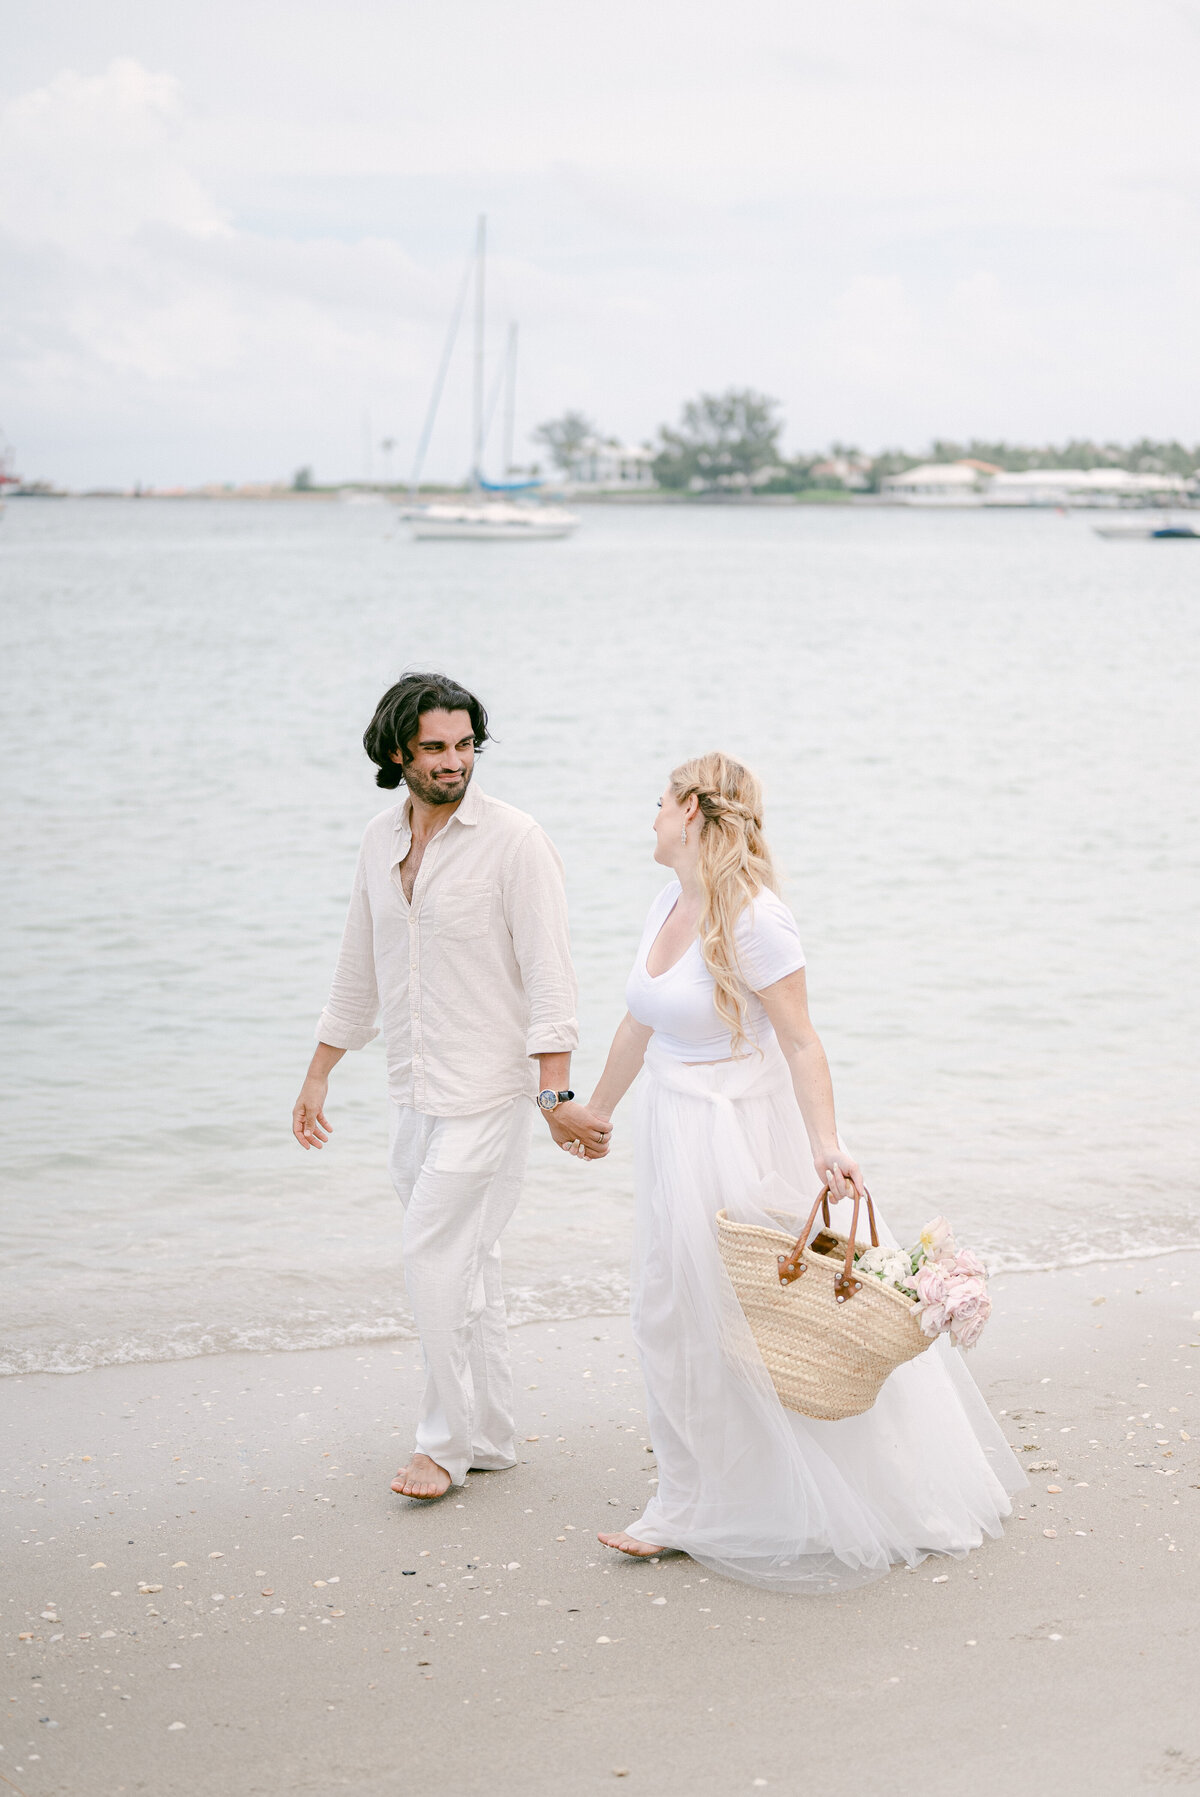 Bride holding a French basket with flowers, holding her husband's hand on the beach